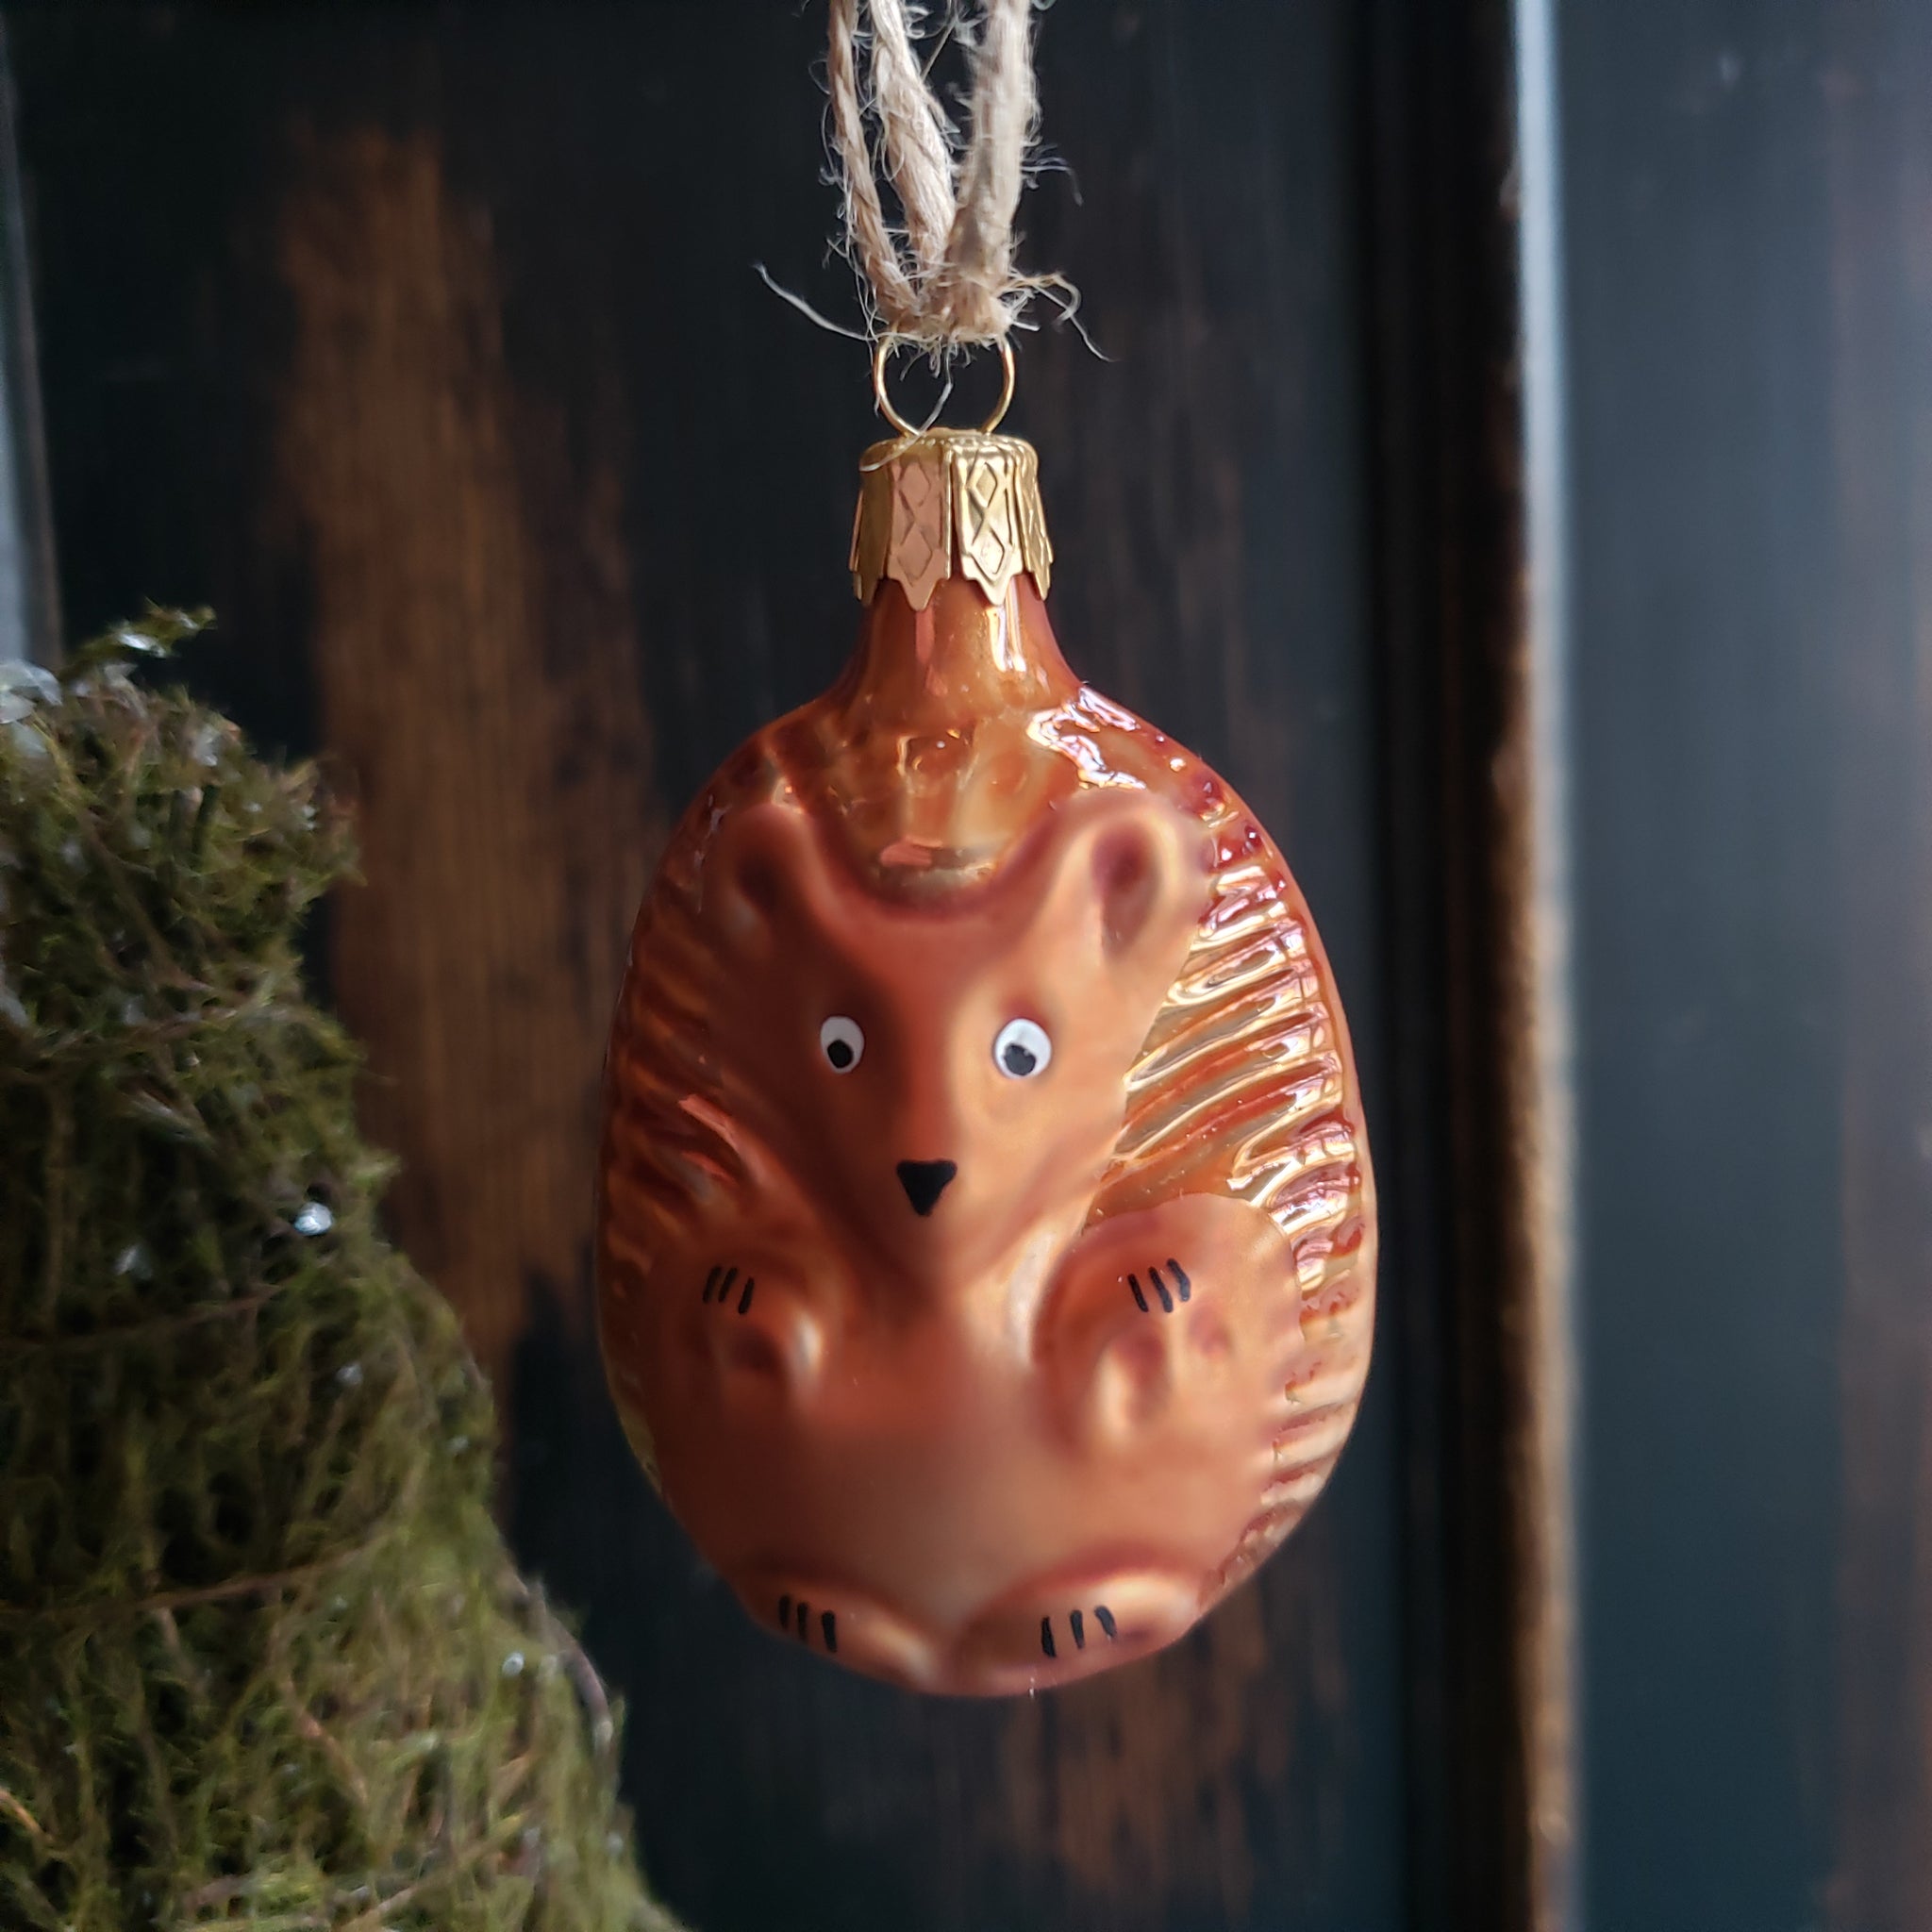 Hedgehog Glass Ornament - Woodland glass ornament handcrafted in Europe, where Old World Christmas ornament making has a long tradition.